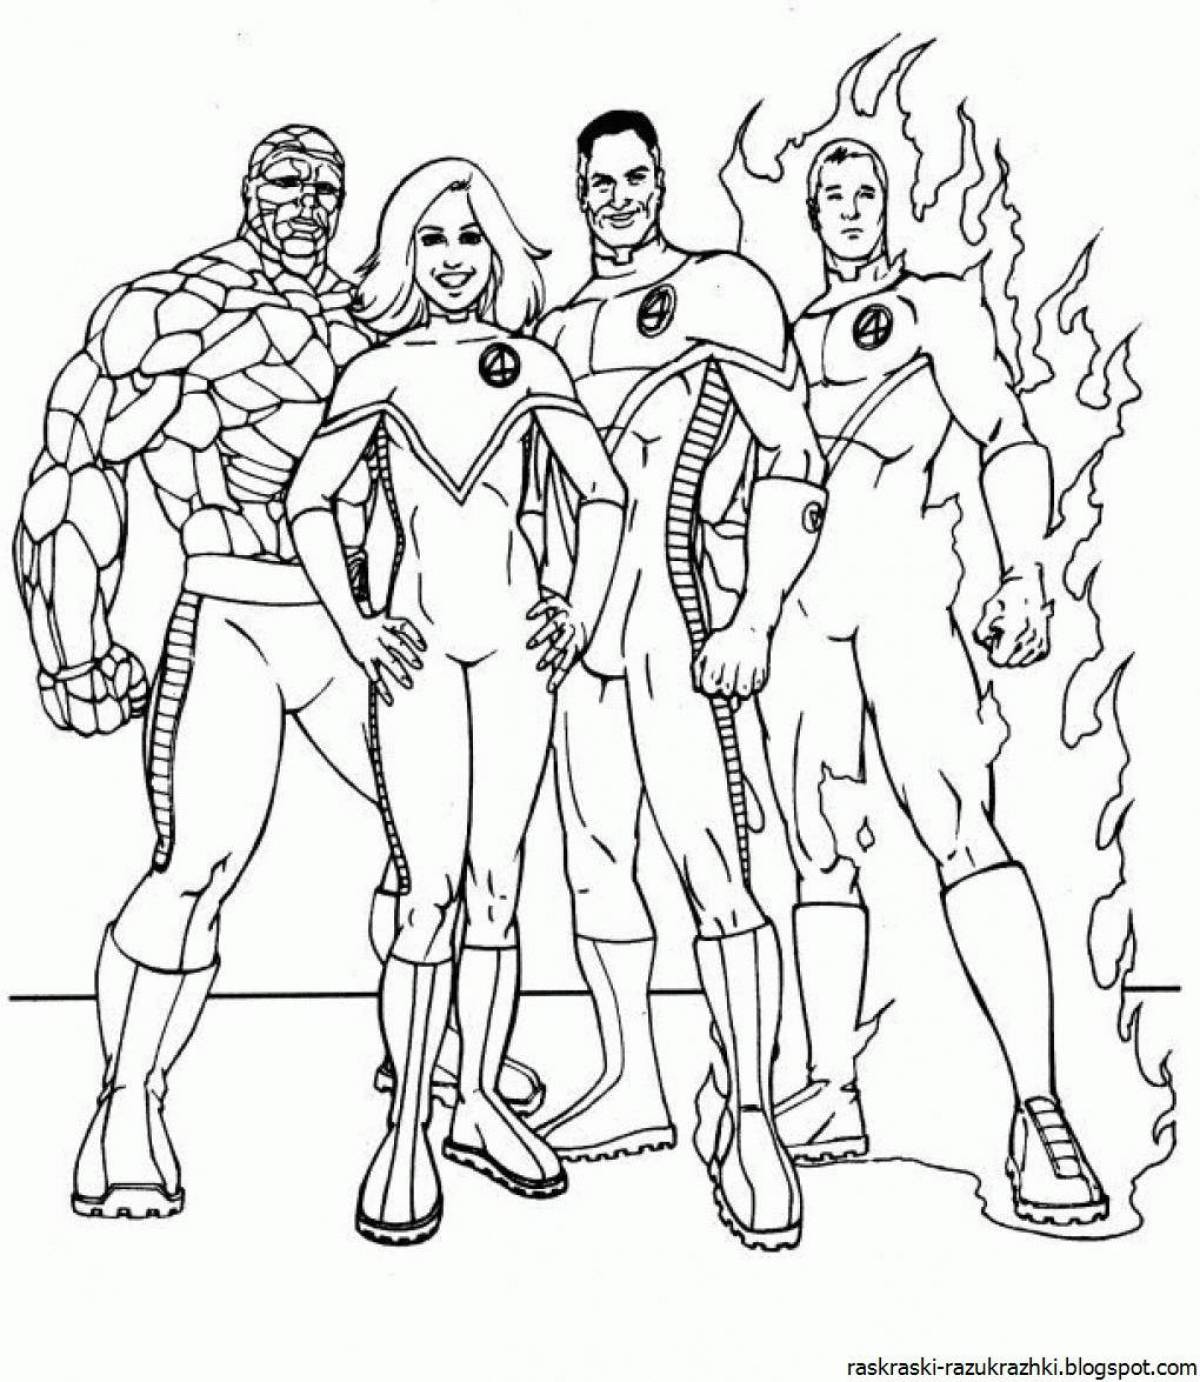 Fun superhero coloring pages for kids